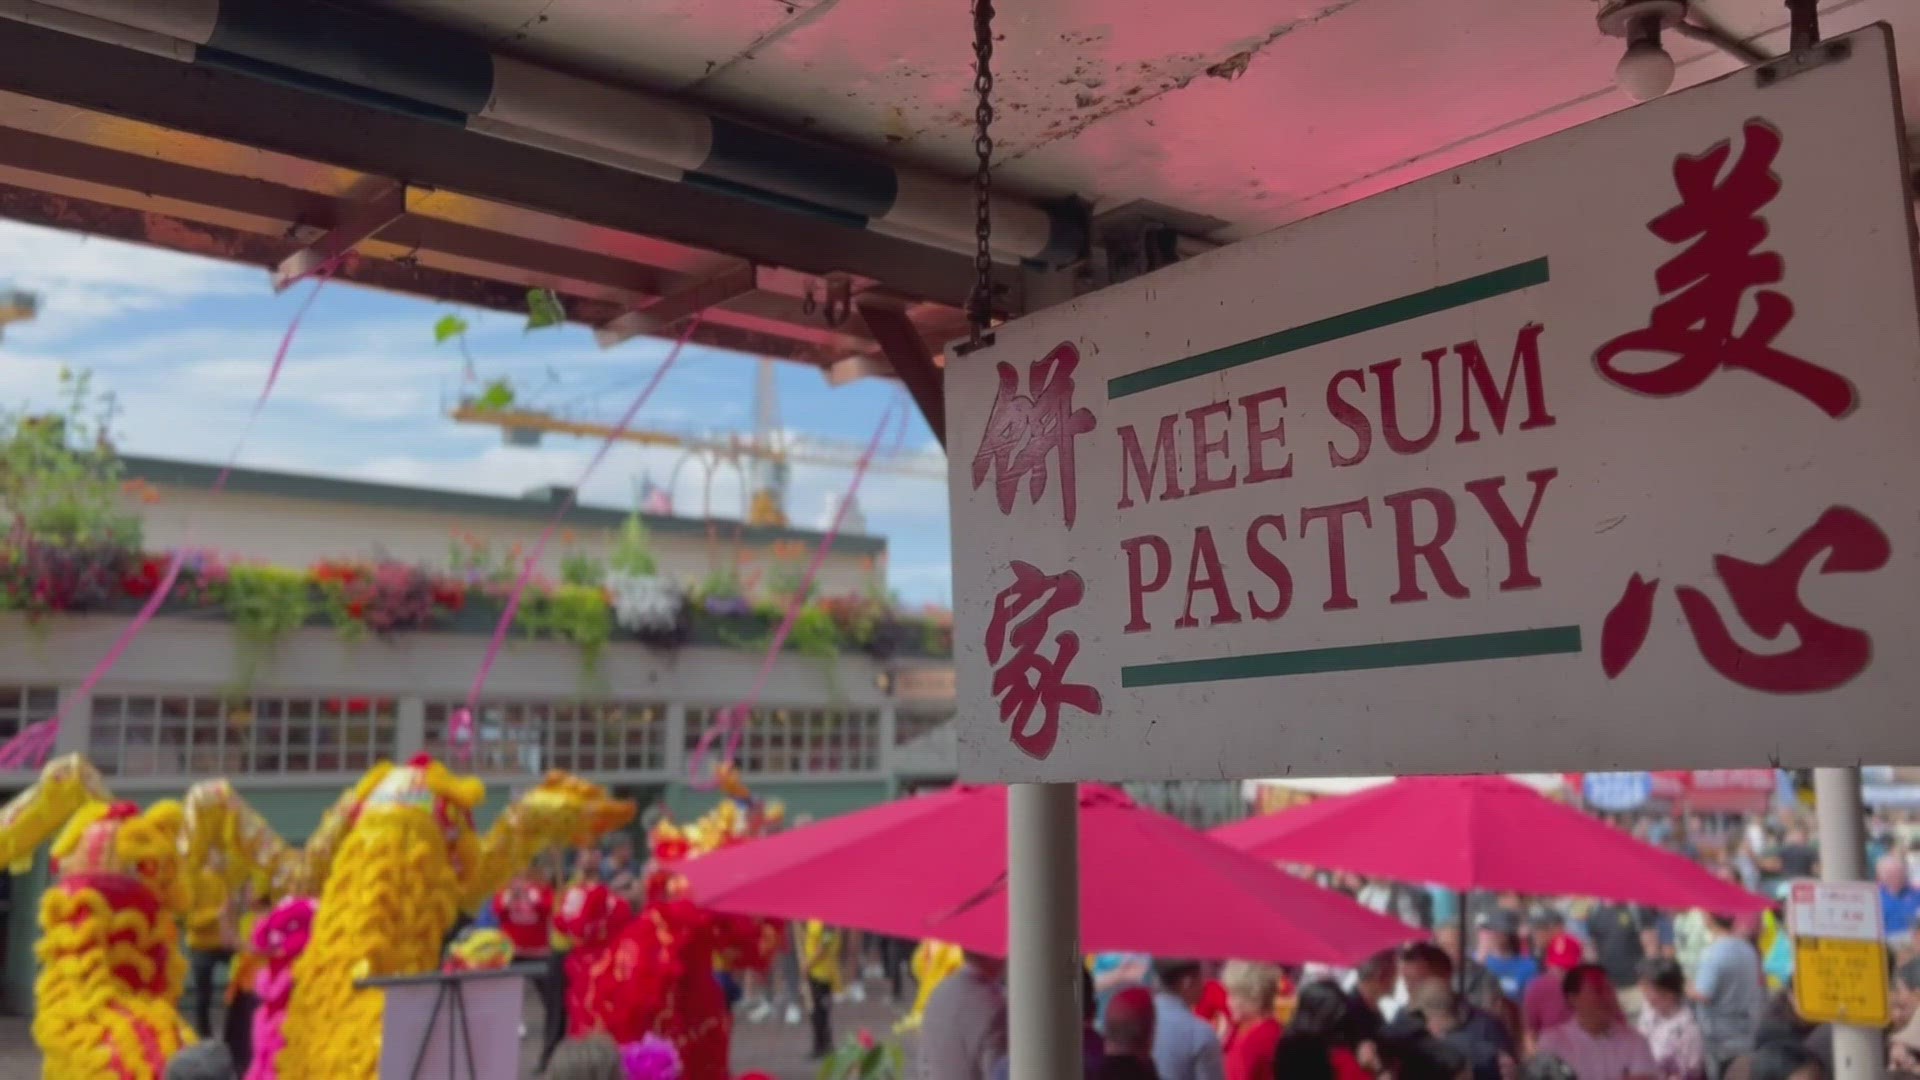 This tiny 325-ft shop has become an iconic stop in the most popular farmers market in the country and is home to the biggest hum bao in Washington state!